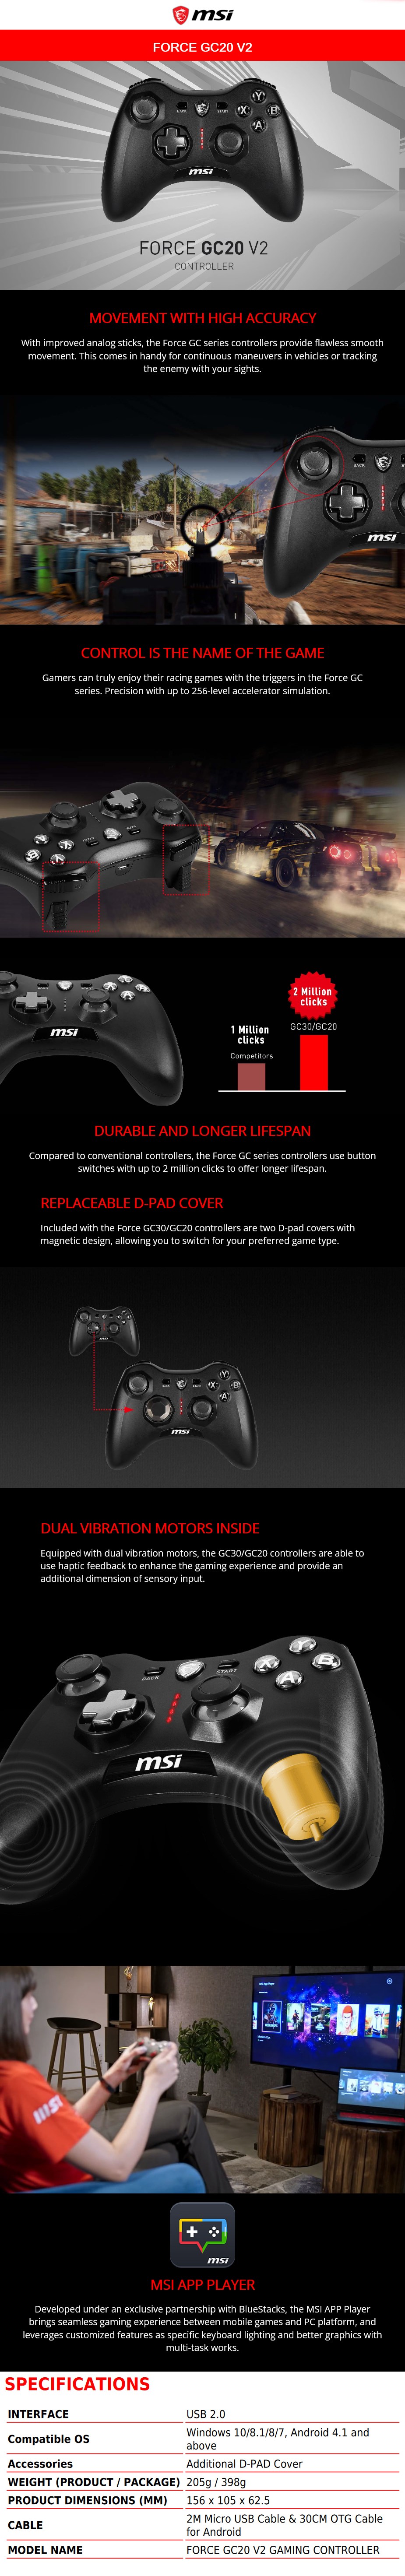 A large marketing image providing additional information about the product MSI Force GC20 V2 Wired Controller Black - Additional alt info not provided